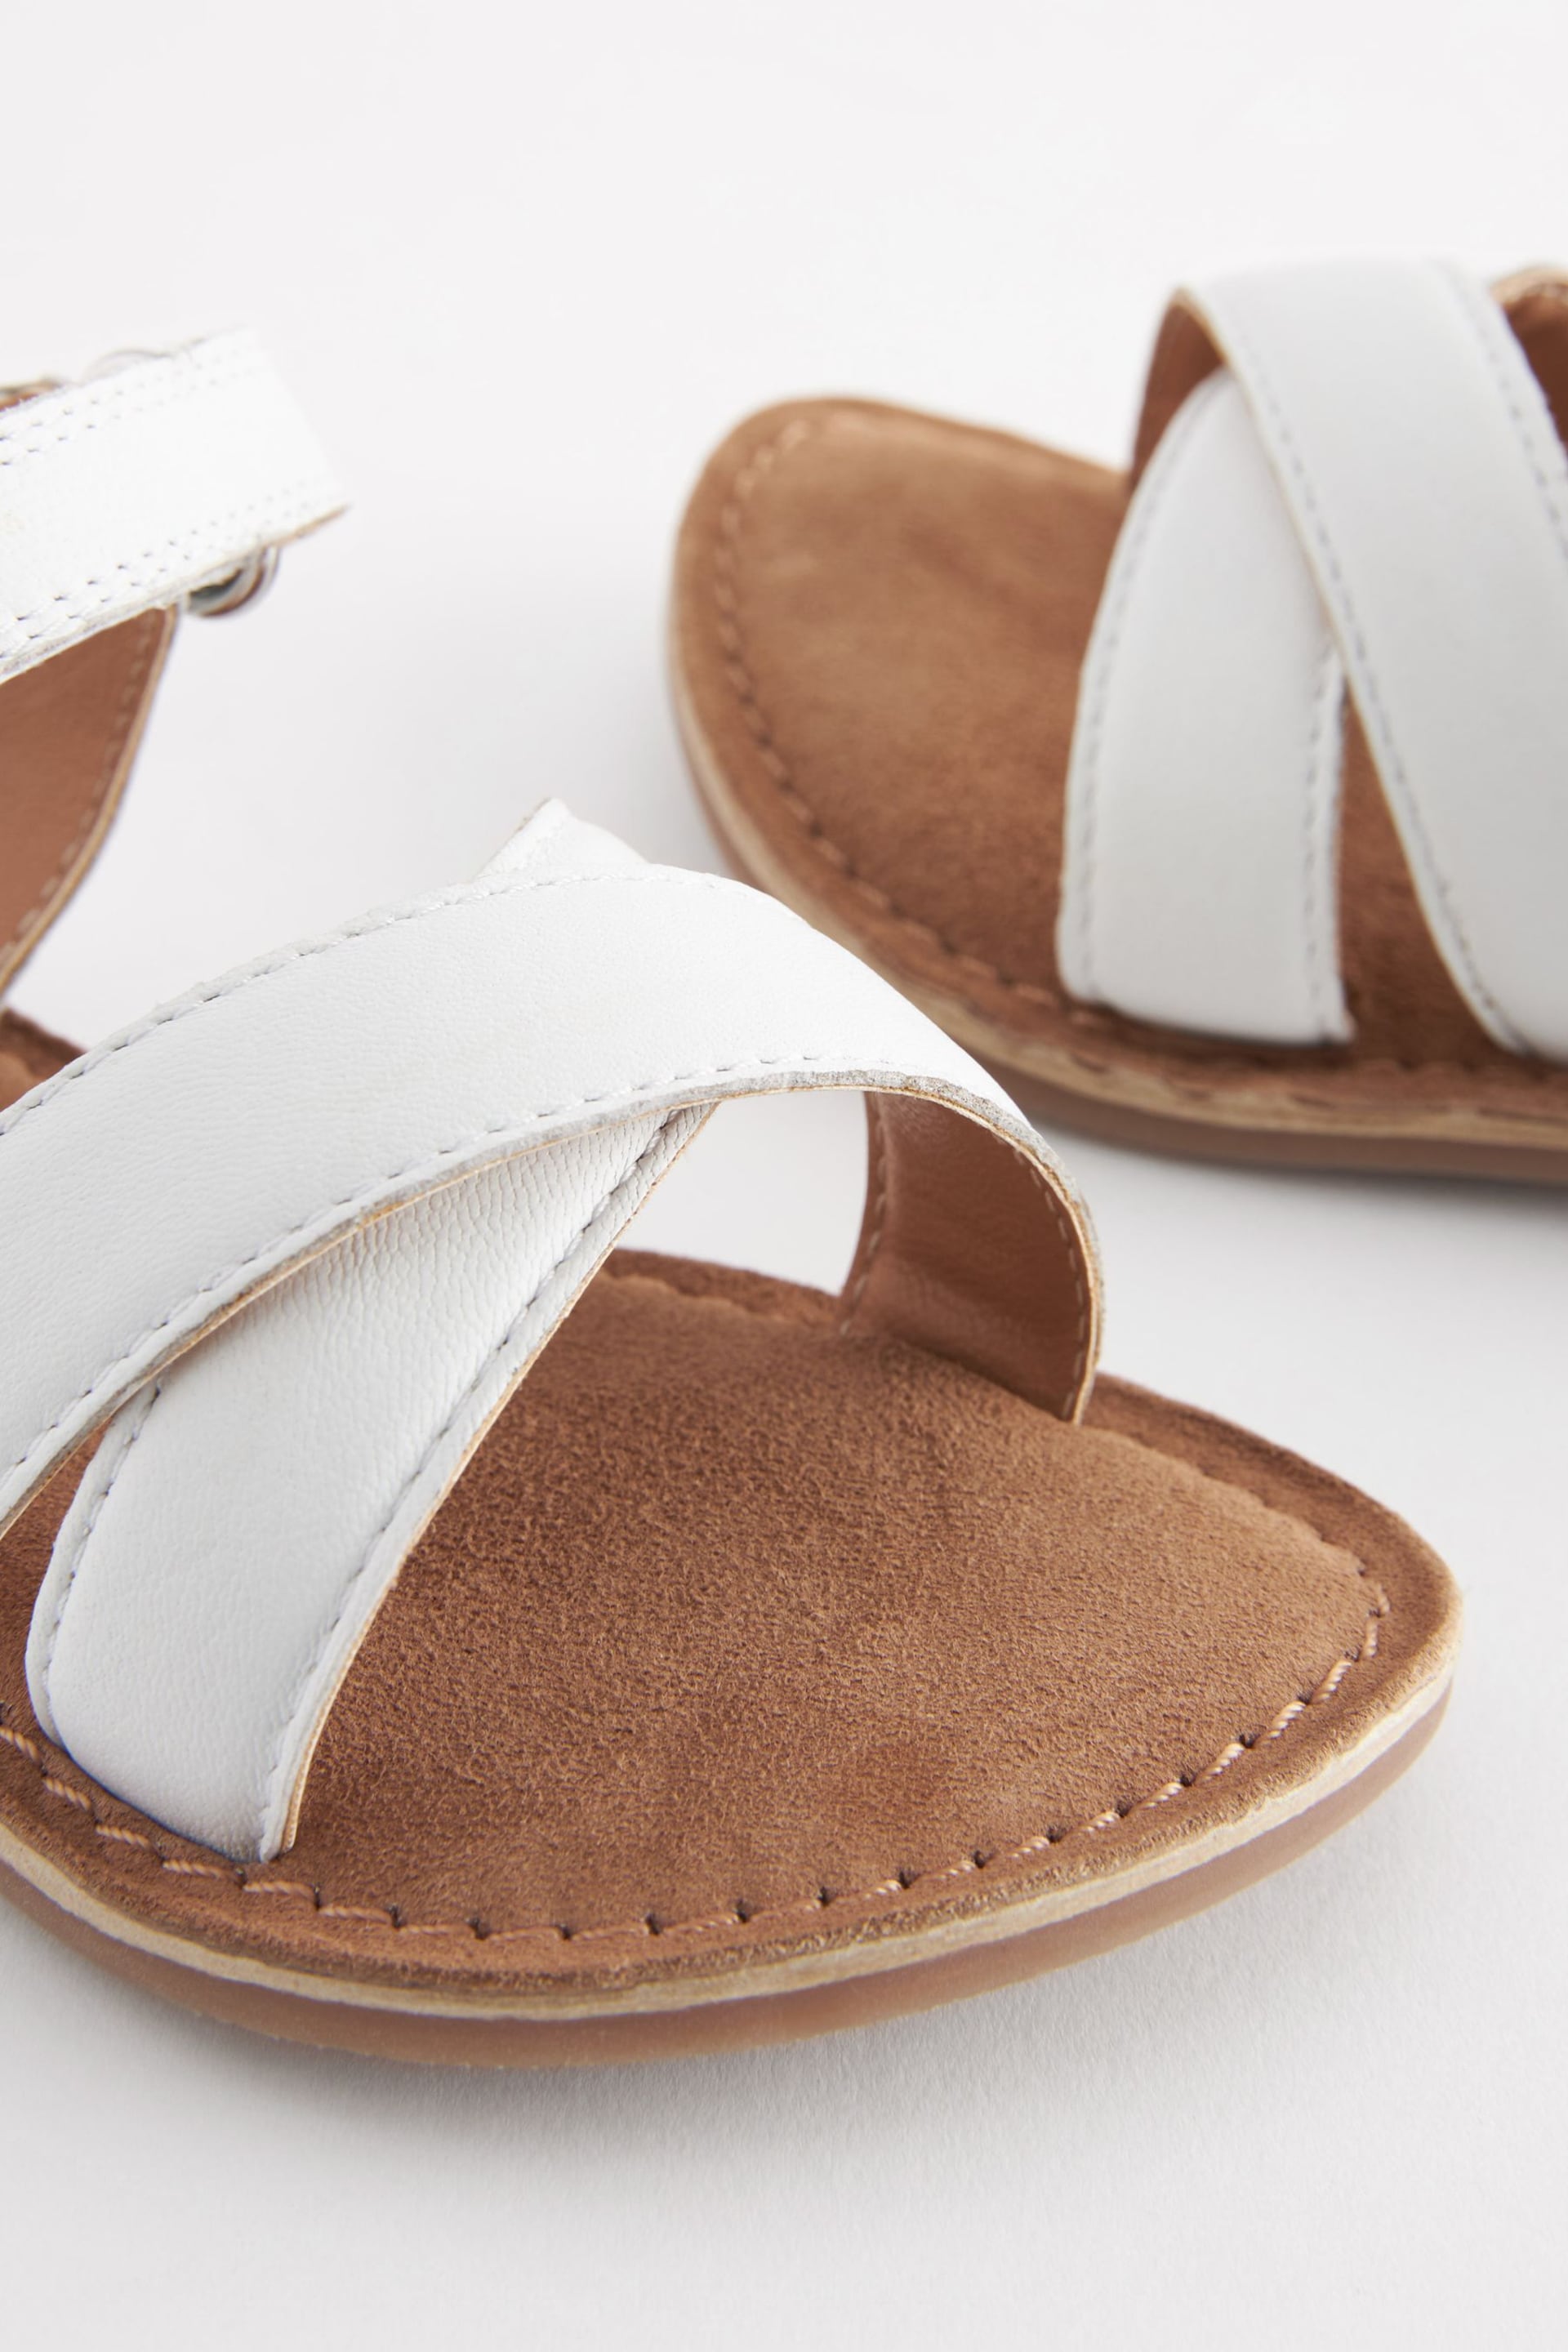 White Leather Sandals - Image 6 of 7